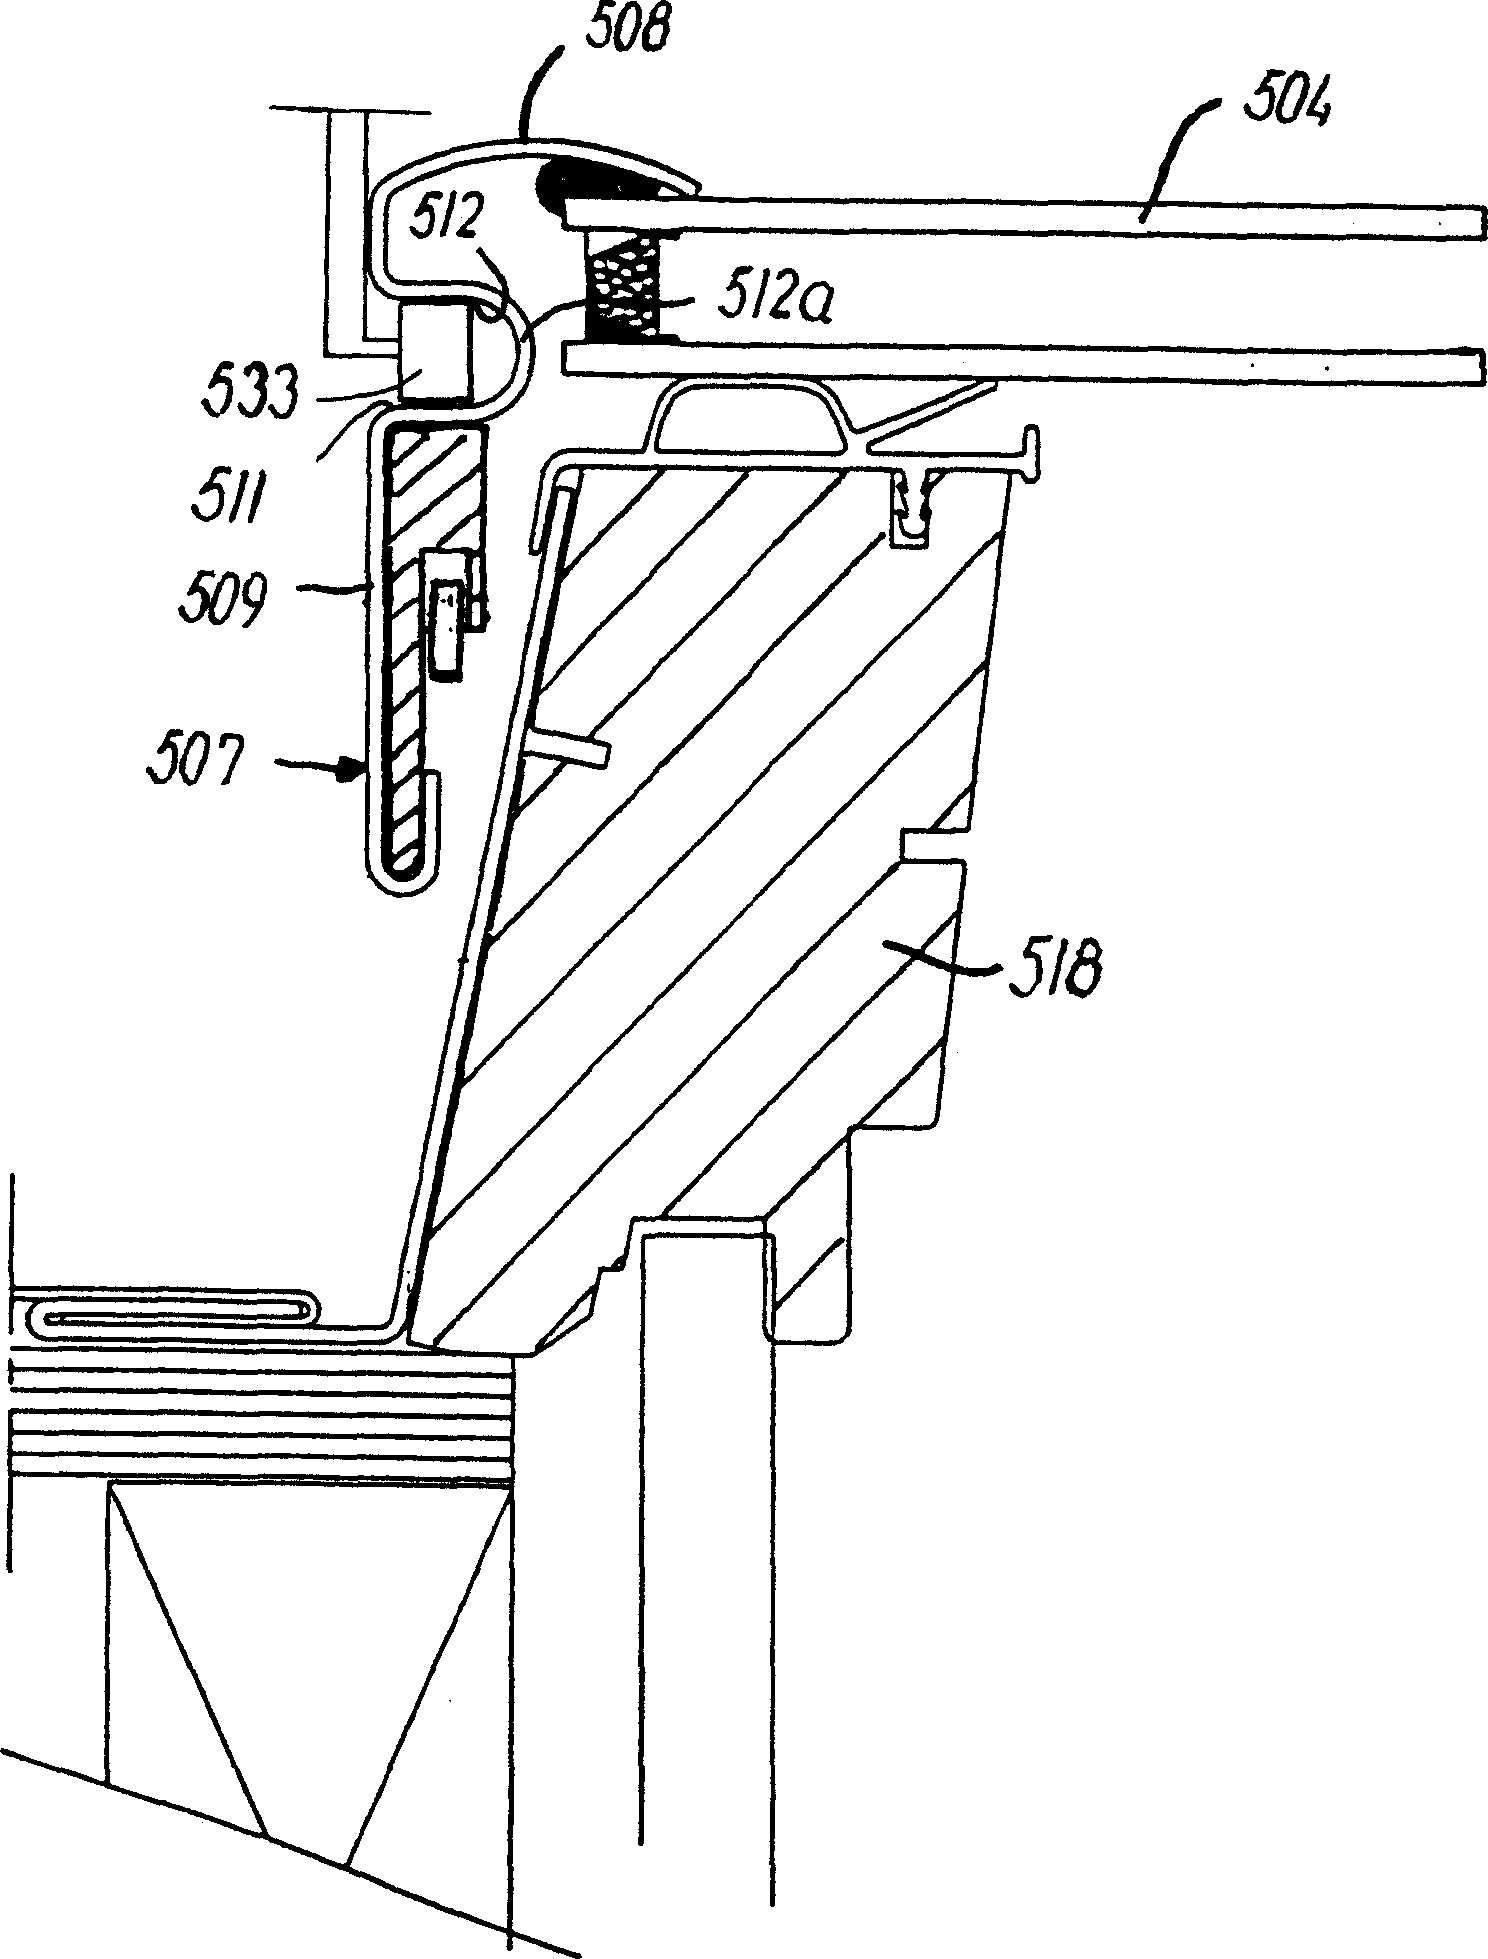 Roof window assembly comprising window component and external screening accessory